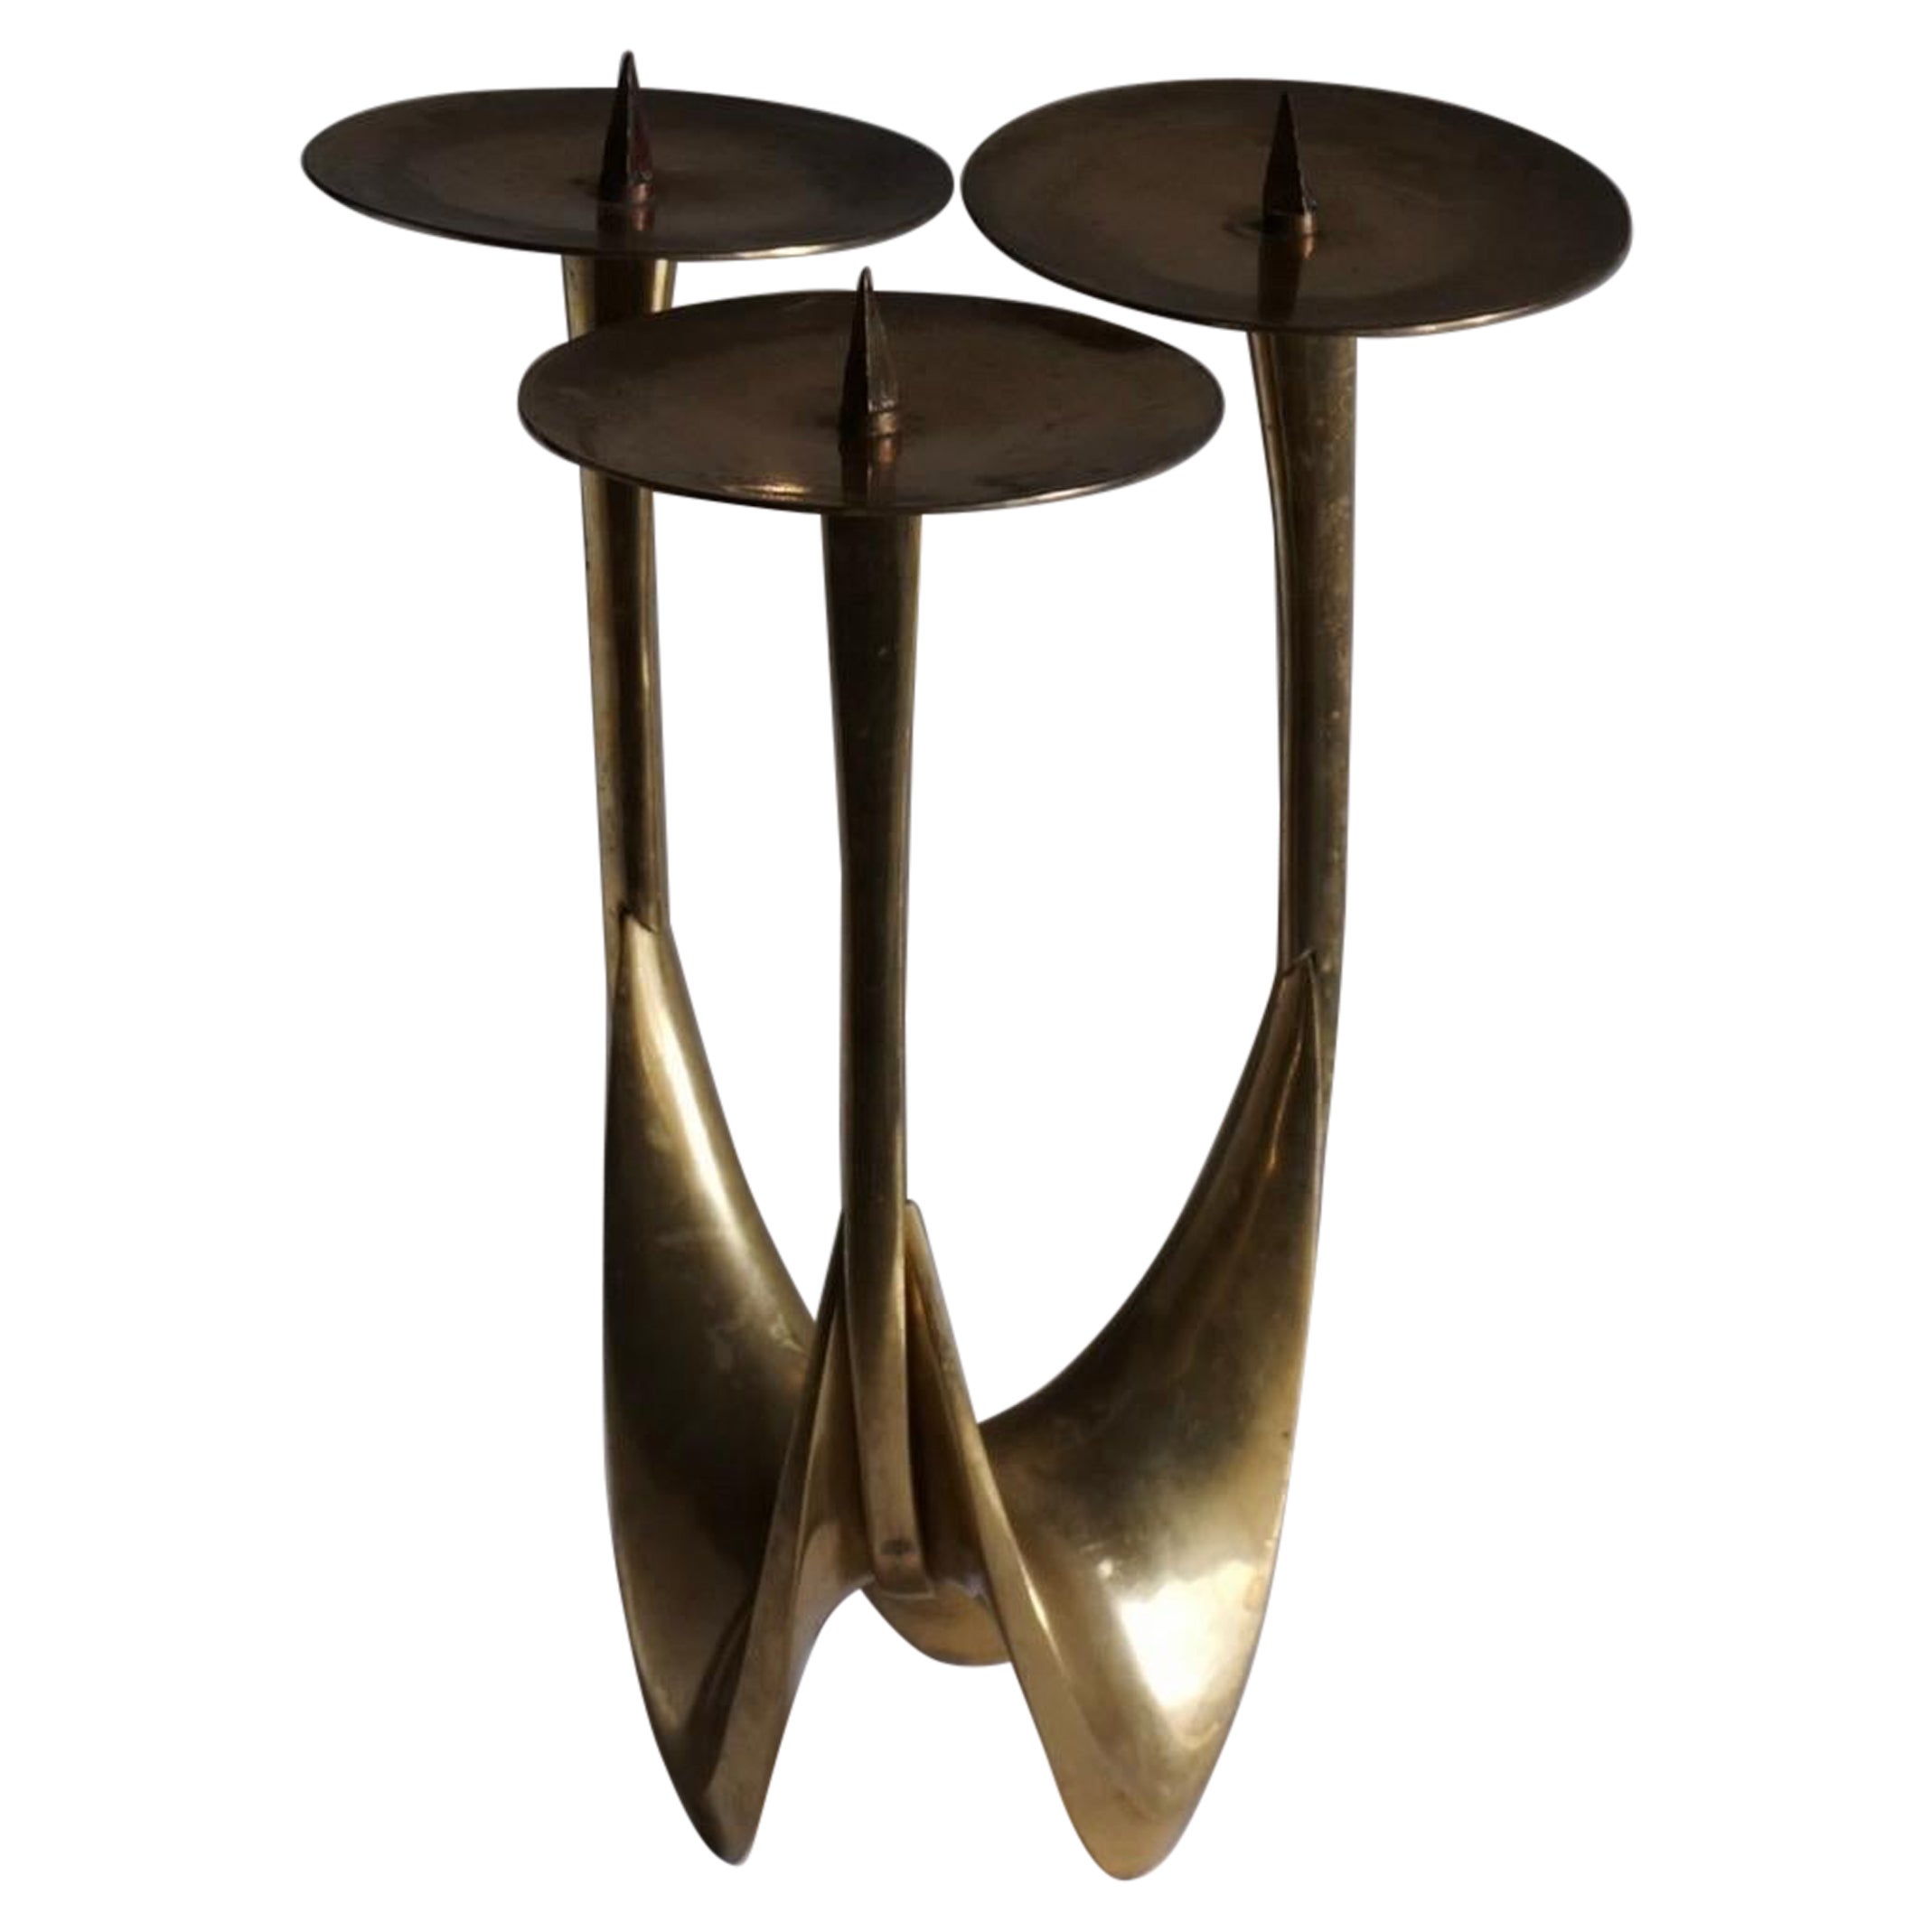 Brutalist Brass Candle Holder by Klaus Ullrich, Faber and Schumacher, 1950s For Sale